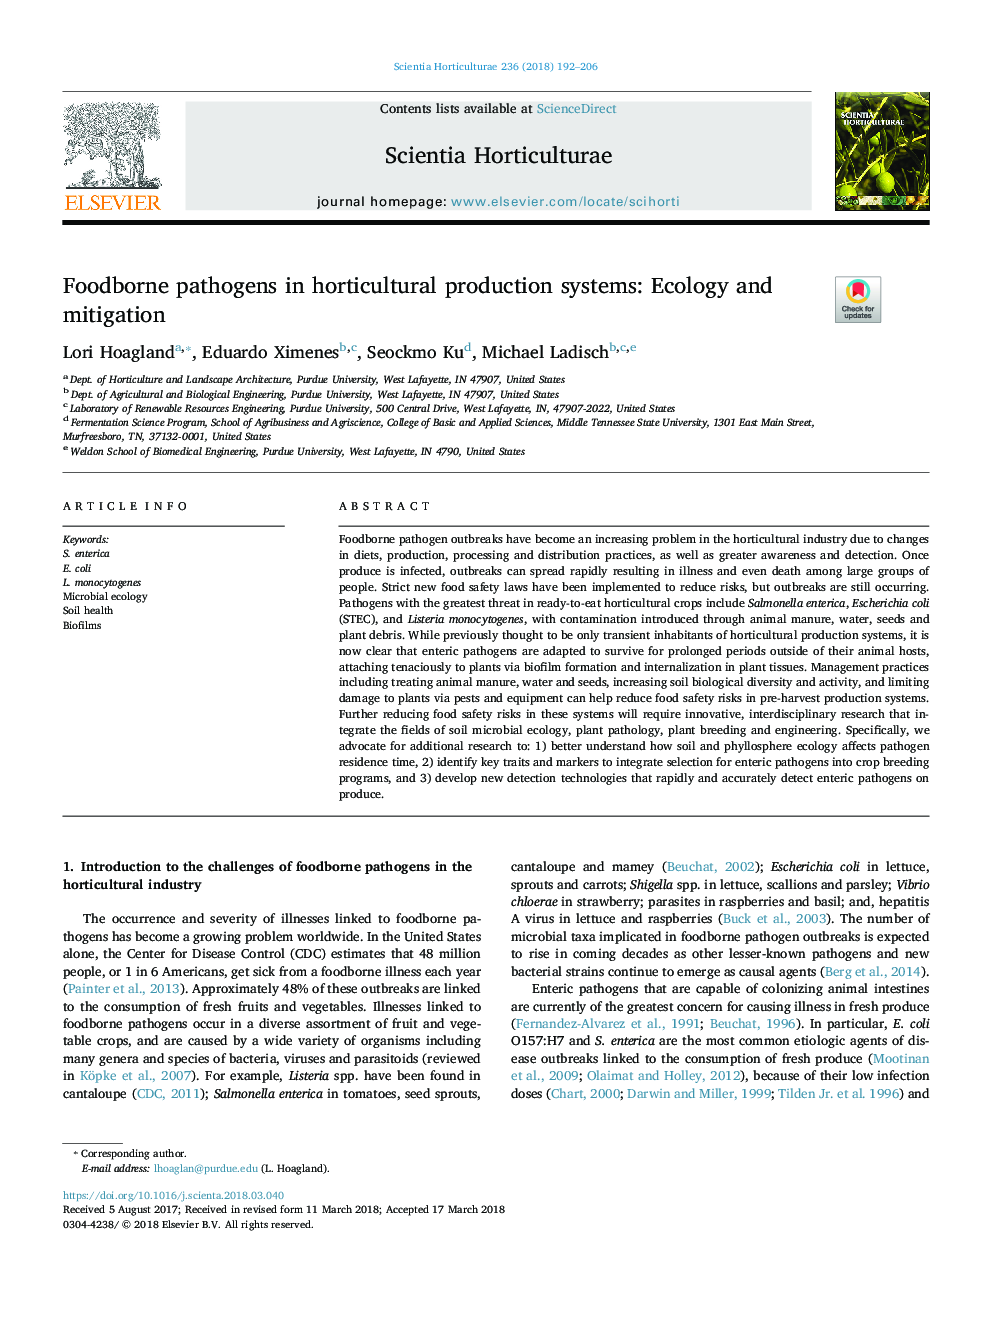 Foodborne pathogens in horticultural production systems: Ecology and mitigation